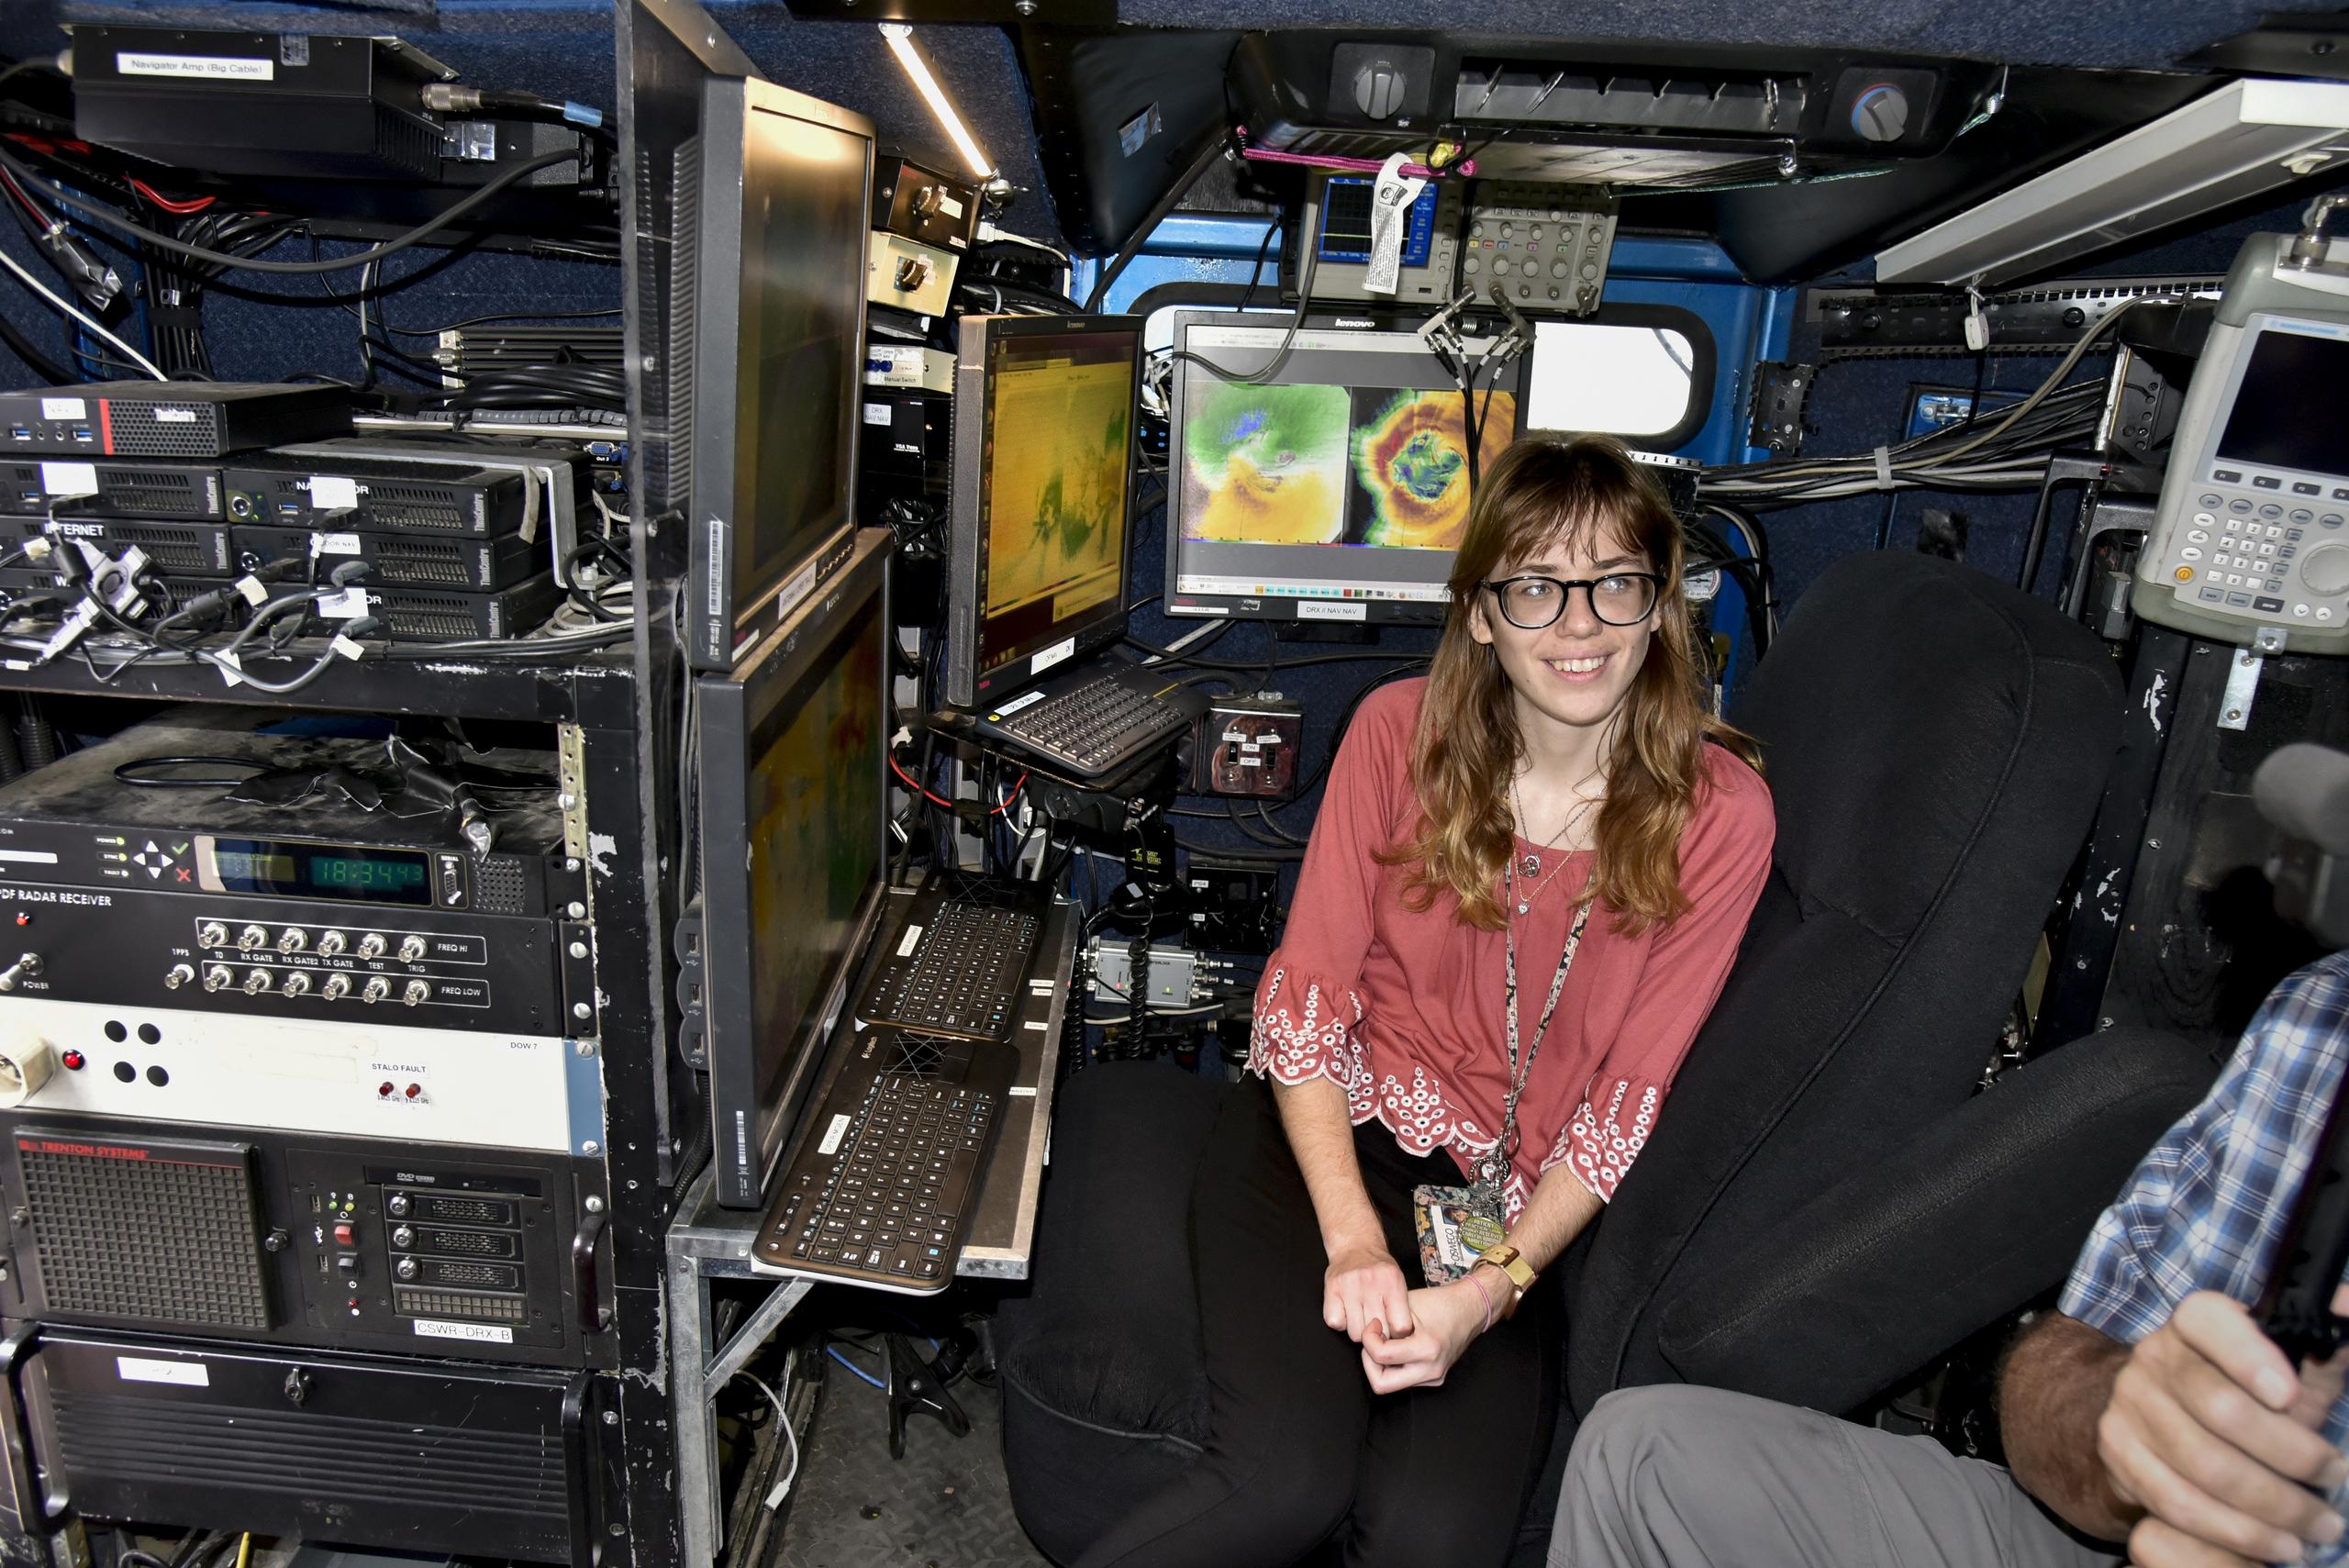 SUNY Oswego will host visit by the Doppler on Wheels high-tech mobile radar vehicle and more for STEM Community Day, from 2 to 5 p.m. on April 6. Samantha Karlsson, now a meteorology grad, sits in the Doppler on Wheels during a 2022 campus visit.